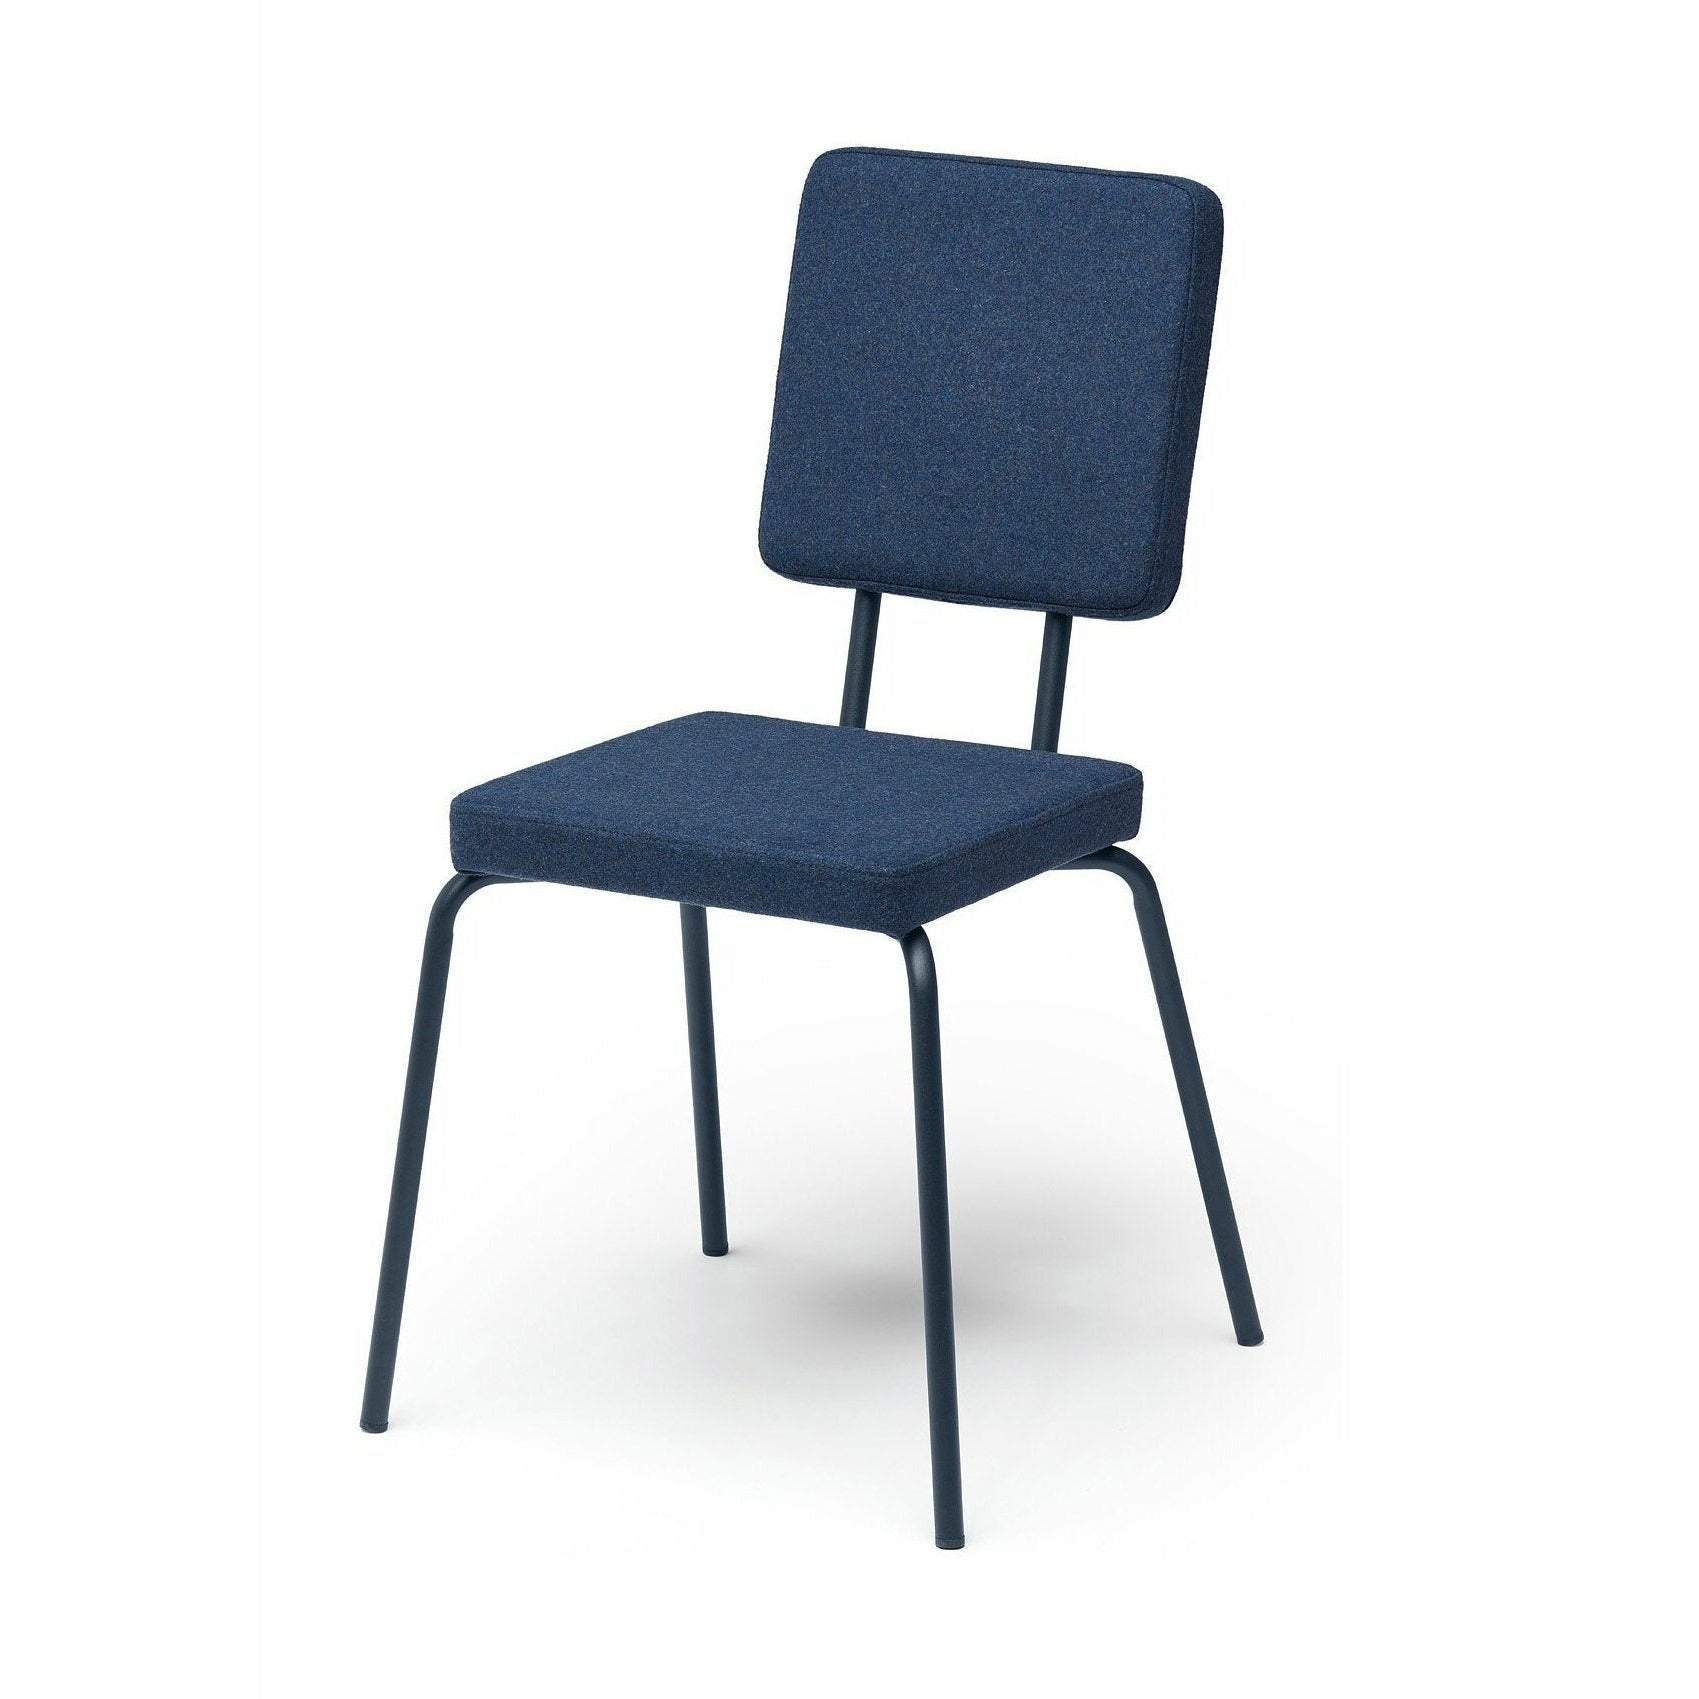 Puik Option Chair Seat And Backrest Square, Dark Blue